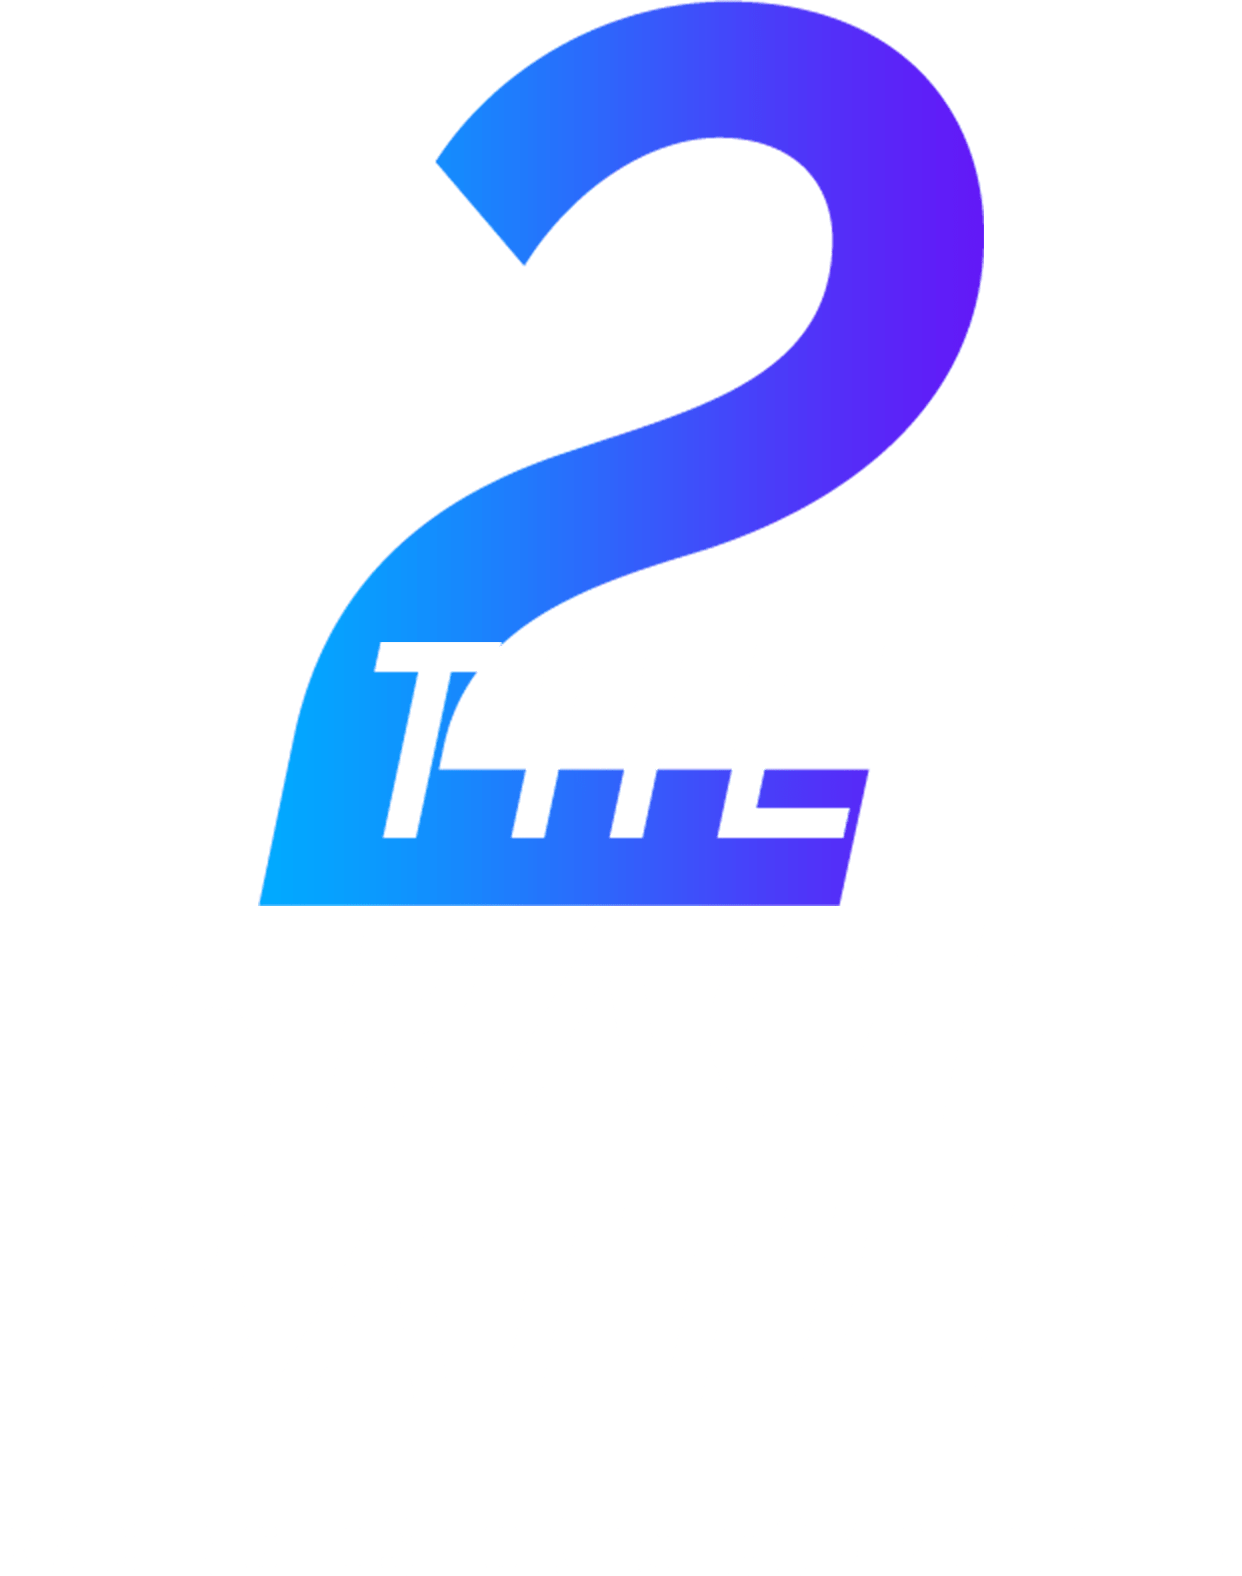 THE eRACE BATTLE 2 Racing Esports Competition